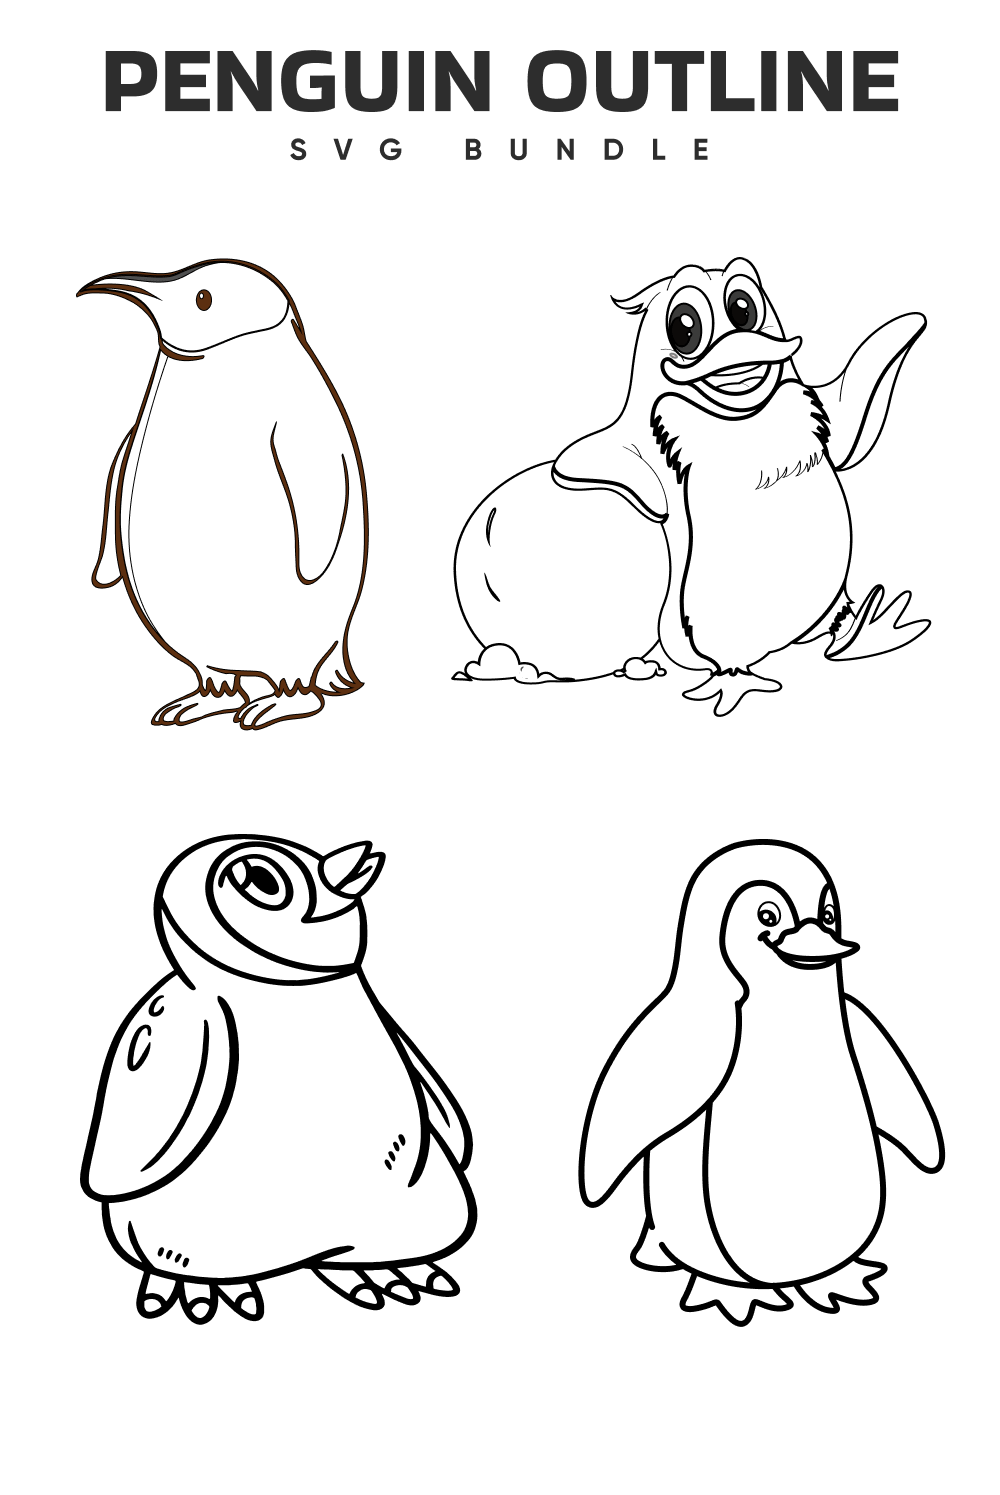 Penguins with big eyes are drawn using a contour.